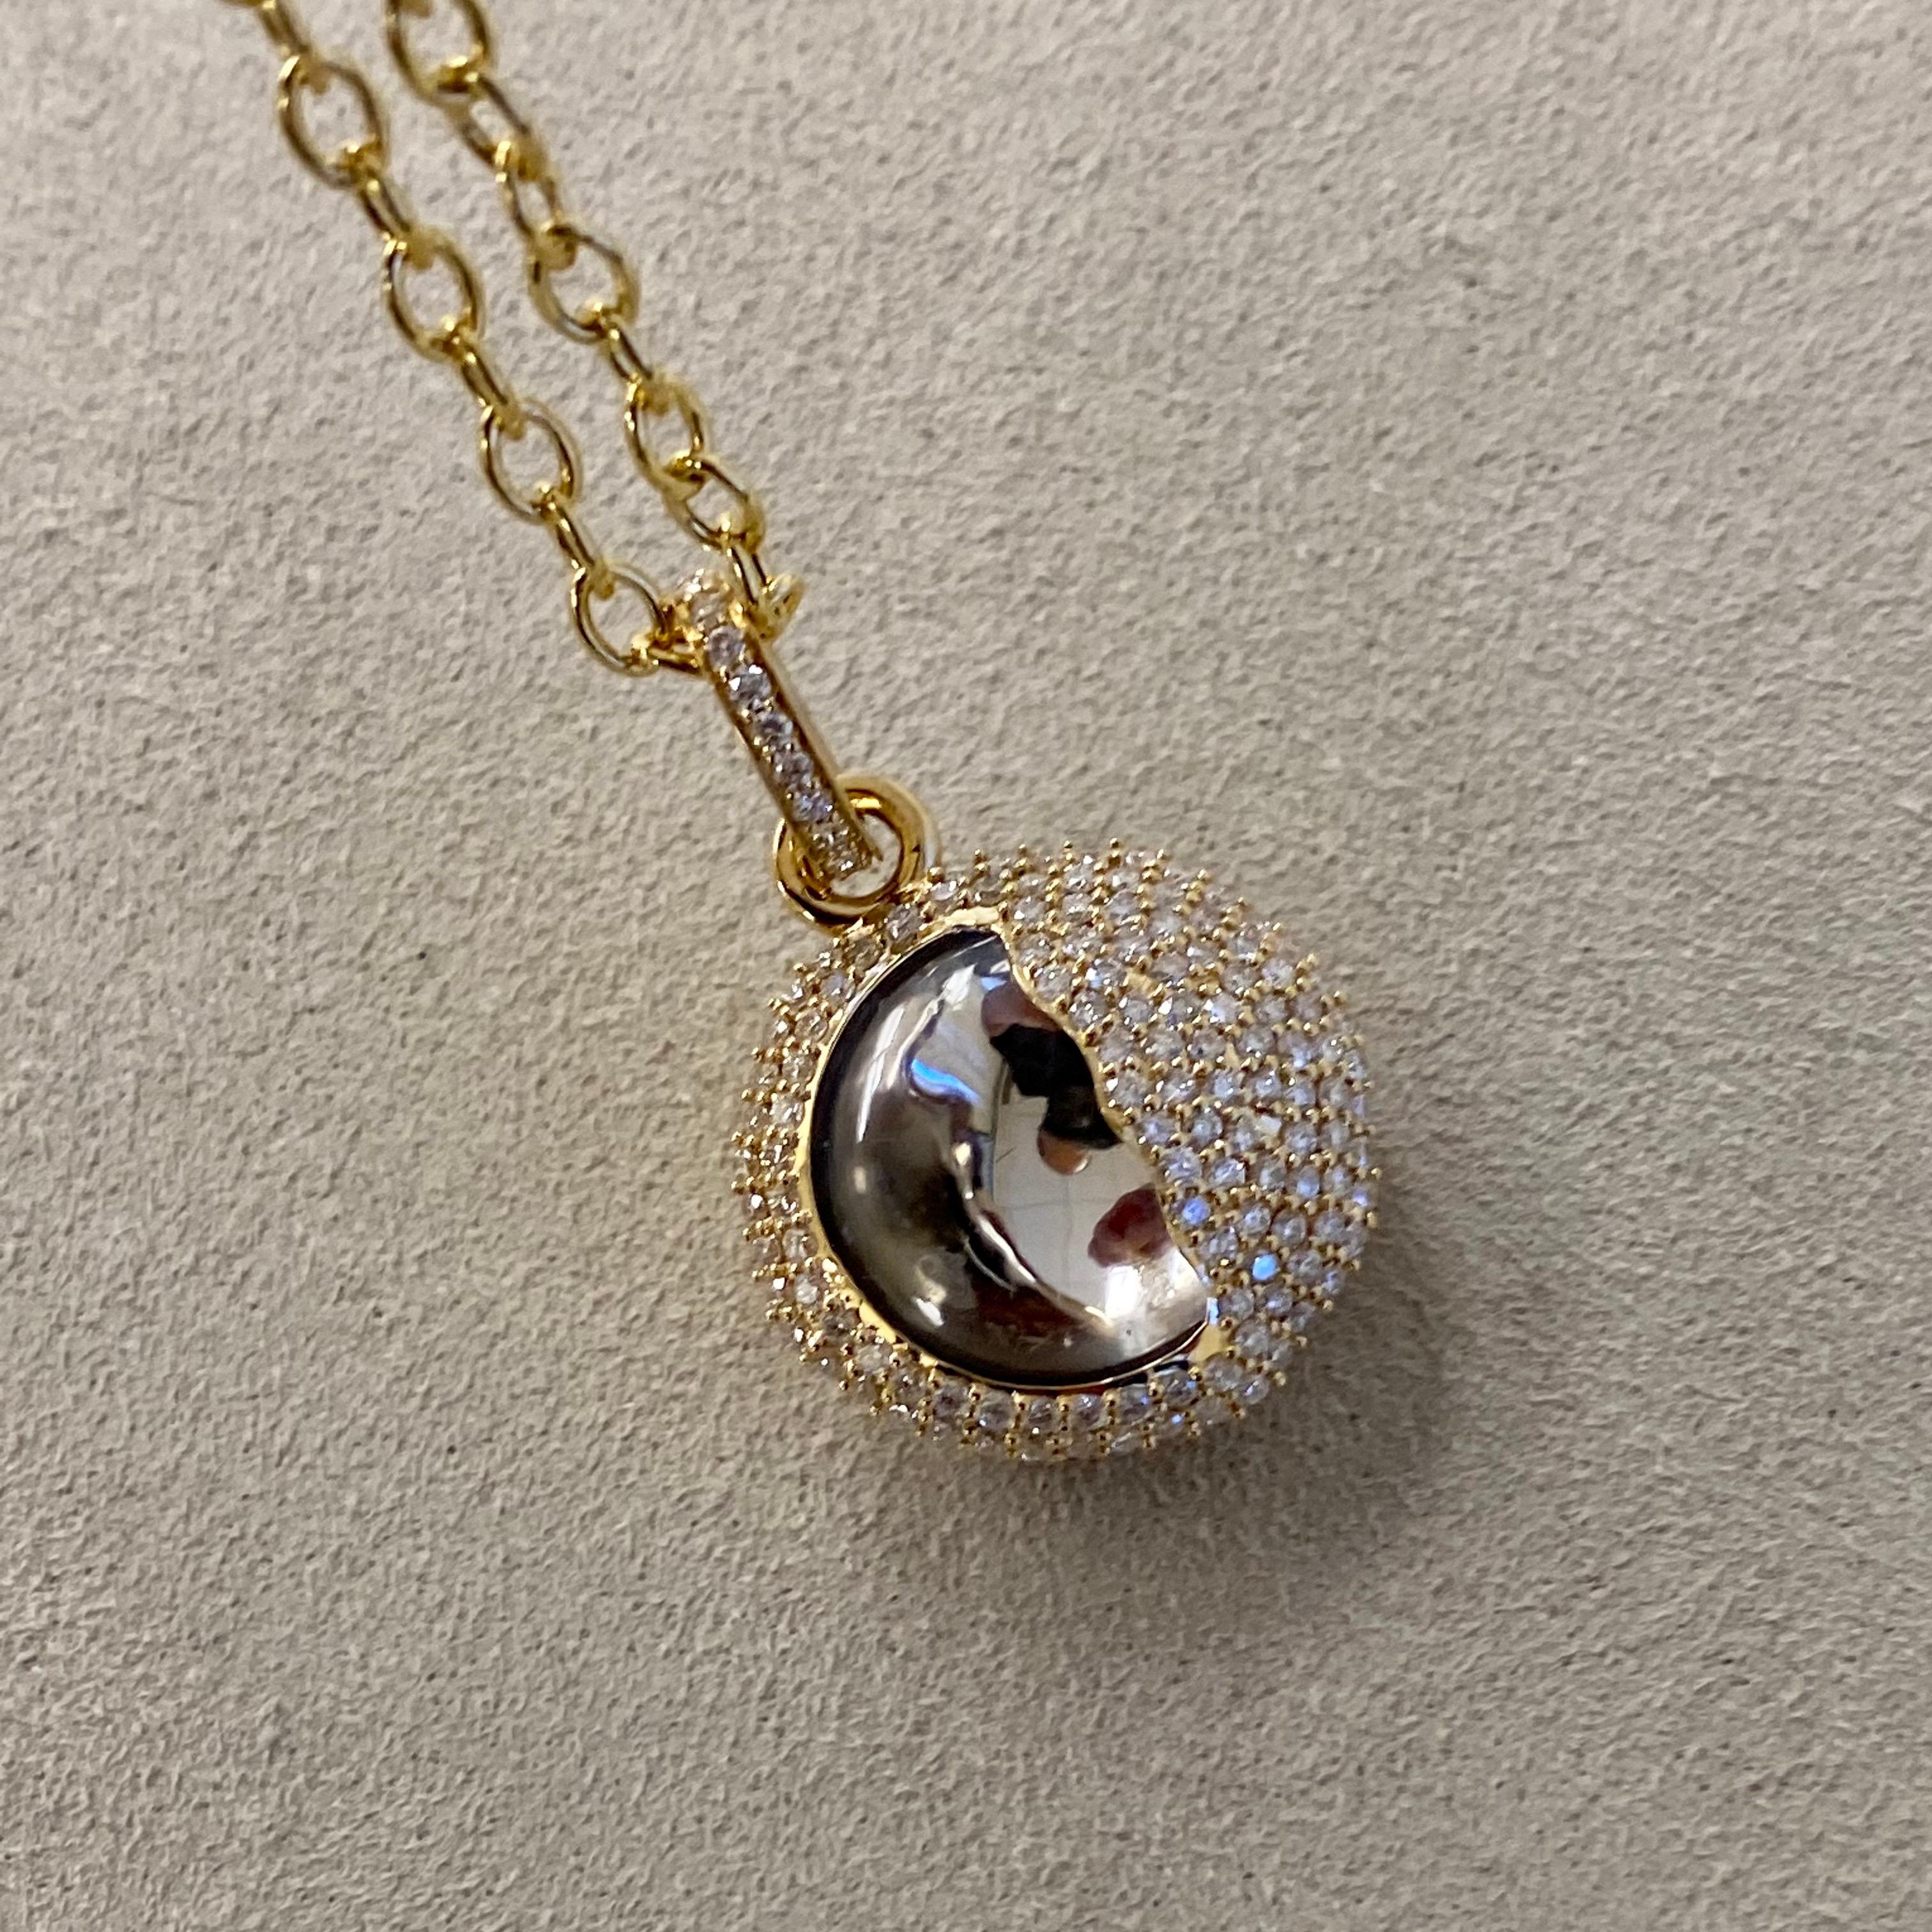 Created in 18 karat yellow gold
Rock Crystal 11 carats approx.
Diamonds 0.80 carat approx.
Chain sold separately
One of a kind

This one-of-a-kind, luxurious pendant is crafted in 18 karat yellow gold, set with a breathtaking 11 carats of rock